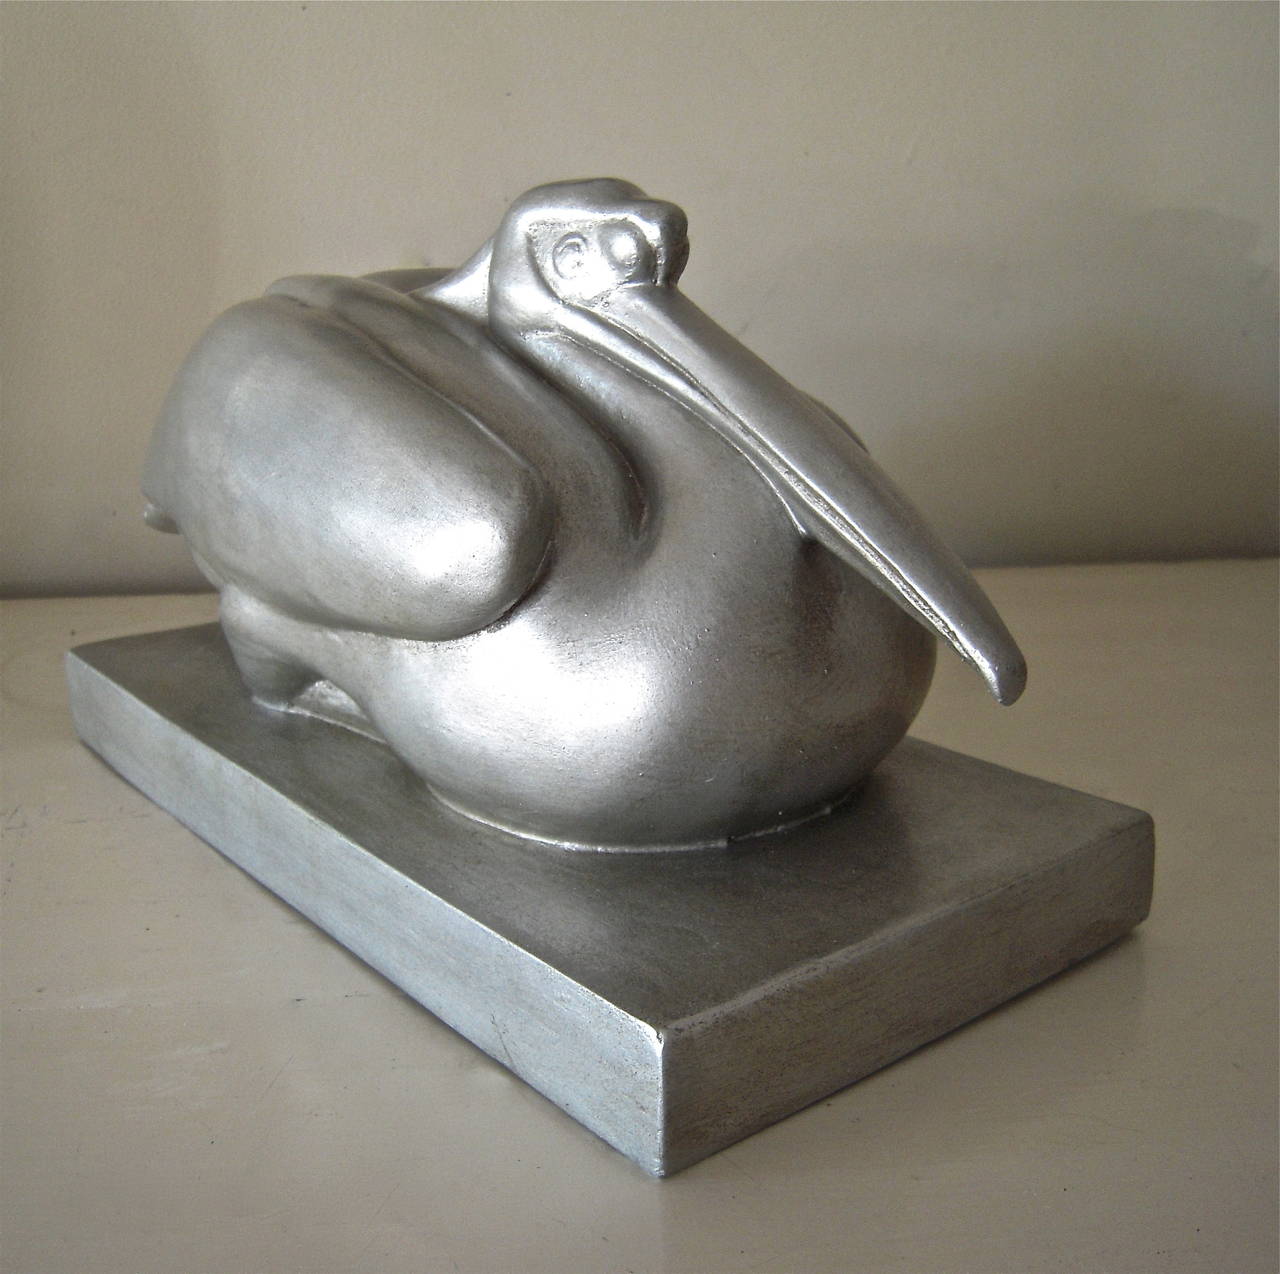 Katharine (Kay) Lane Weems (American, 1899-1989) silver painted plaster figure of a seated pelican, originally modeled in 1942. This example is a Skylight Studios casting, circa 1990. 

Height: 6